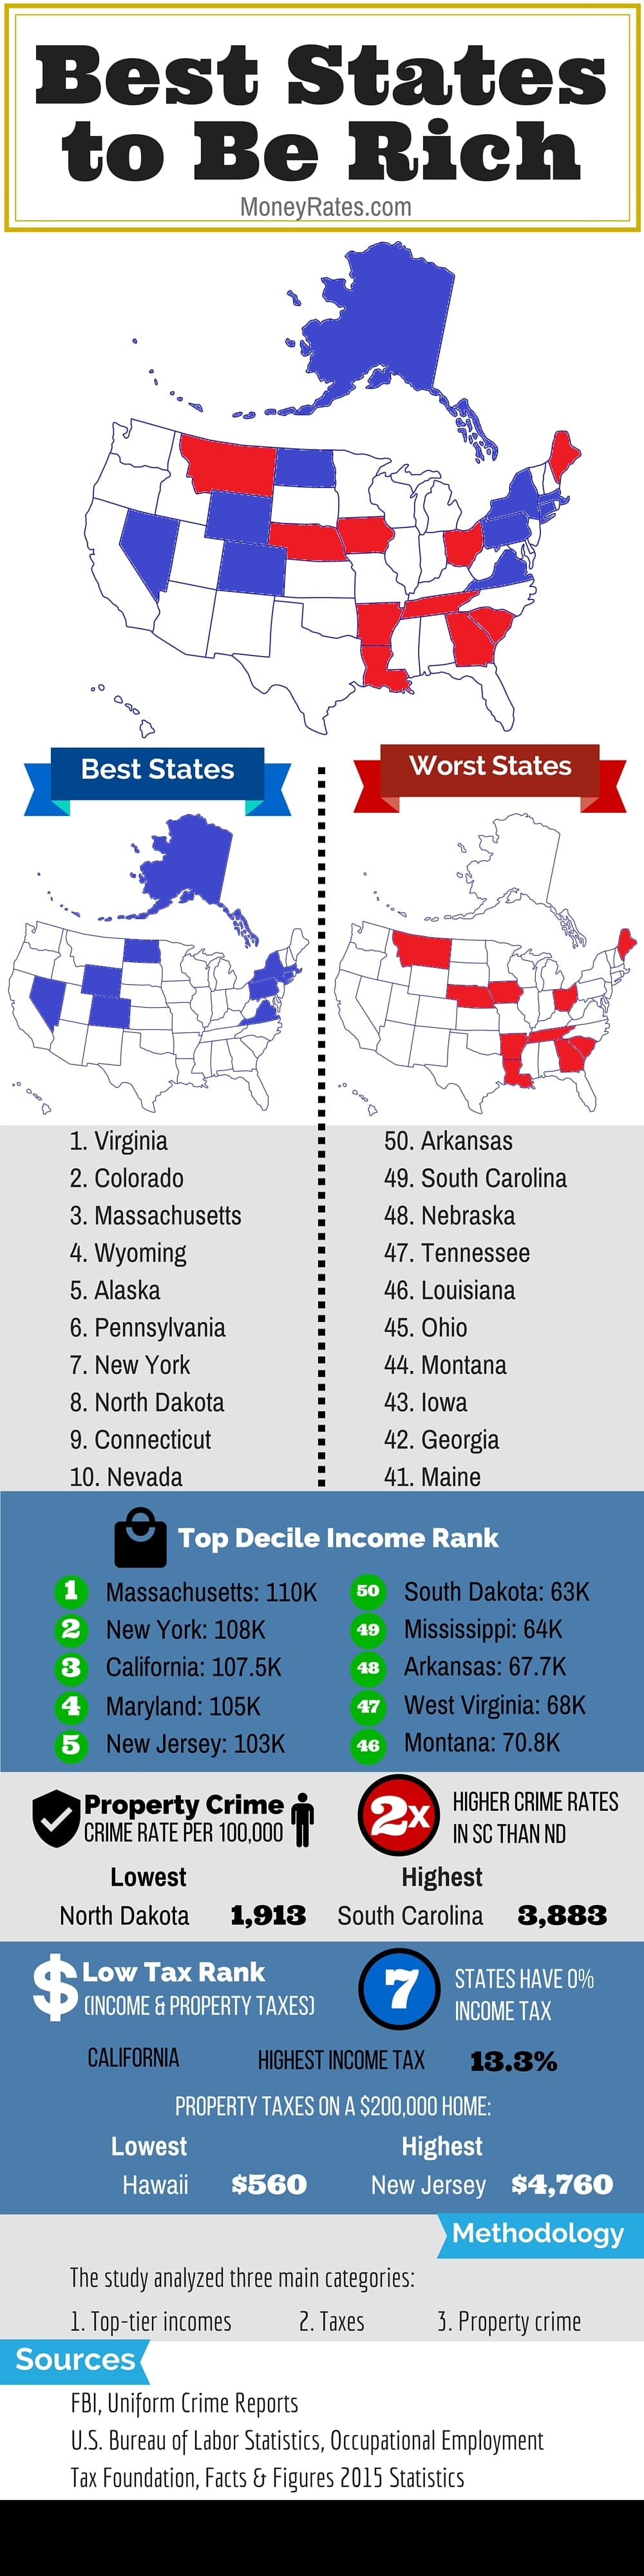 An infographic showing the best and worst states to be rich.